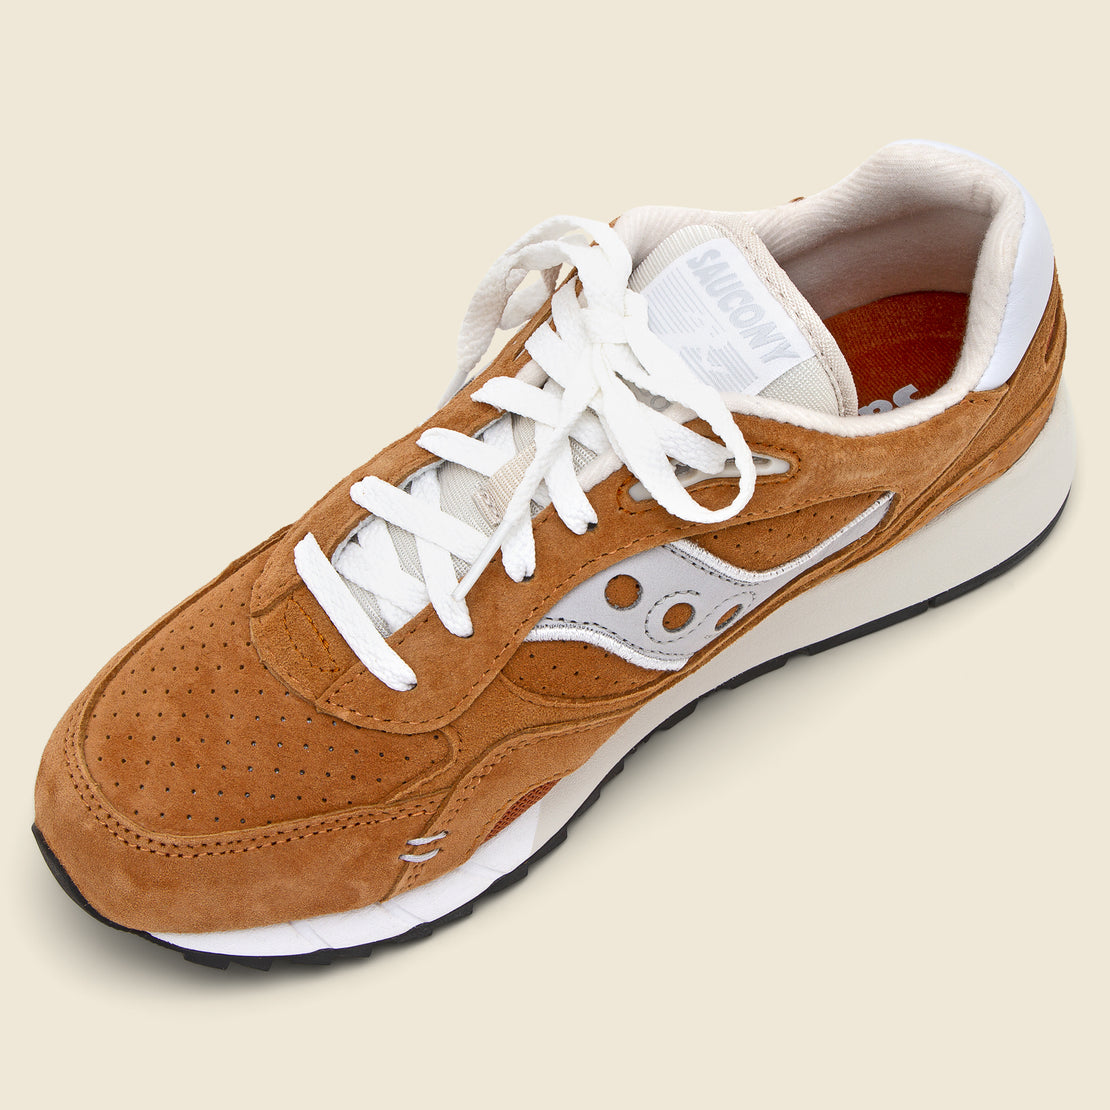 Shadow 6000 Sneaker - Orange/White - Saucony - STAG Provisions - Shoes - Athletic